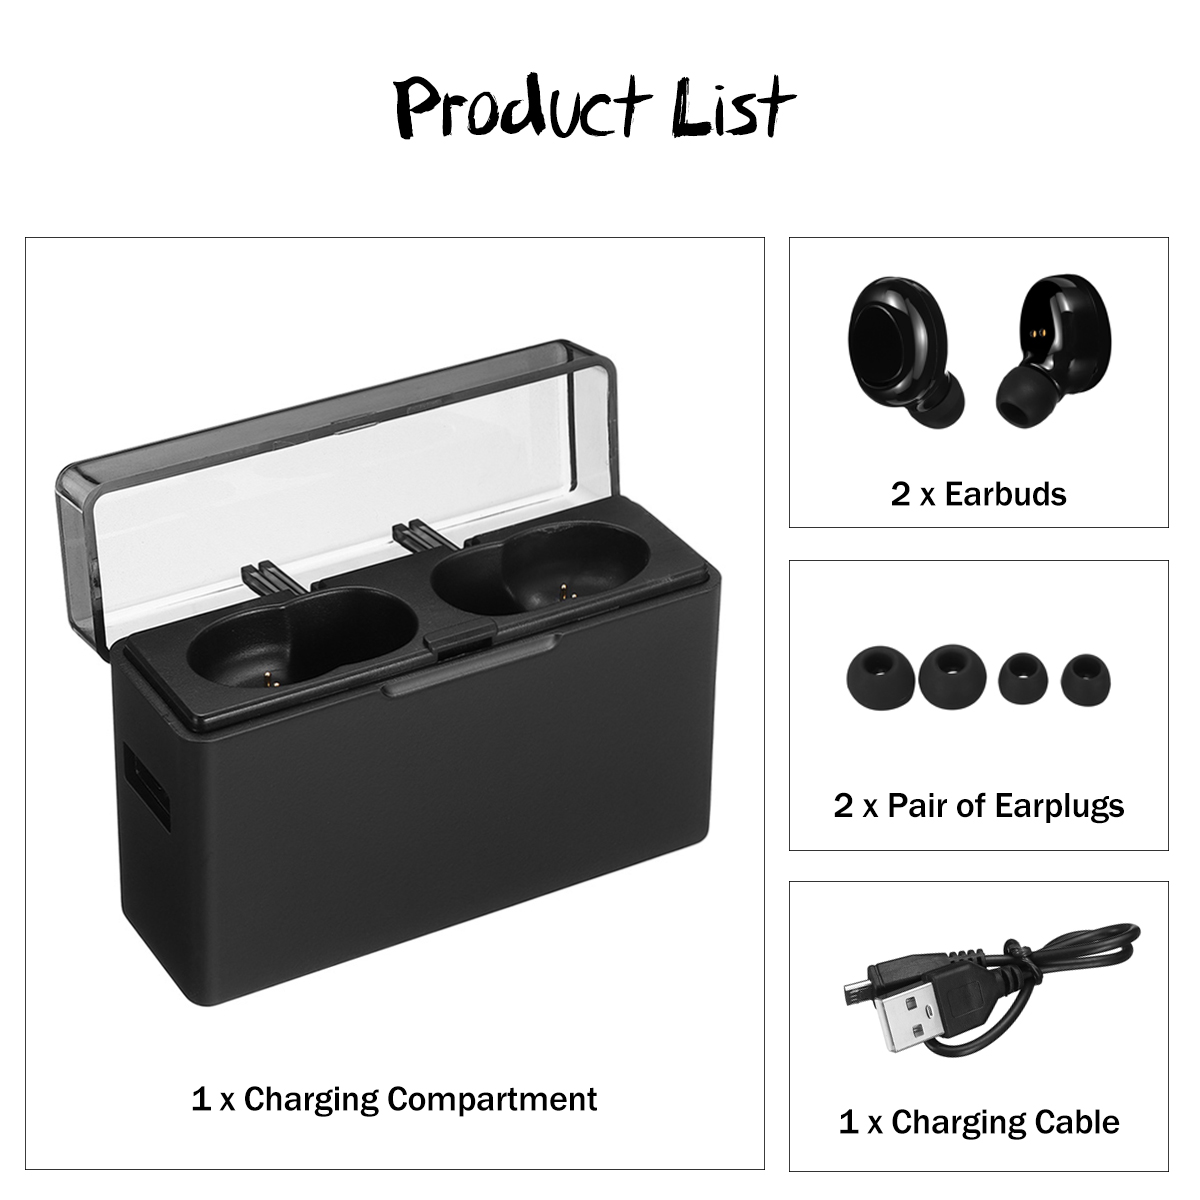 T3-TWS-bluetooth-50-Earbuds-Hi-Fi-Noise-Cancelling-Wireless-Headset-Earphone-With-3500mAh-Charging-C-1516229-11